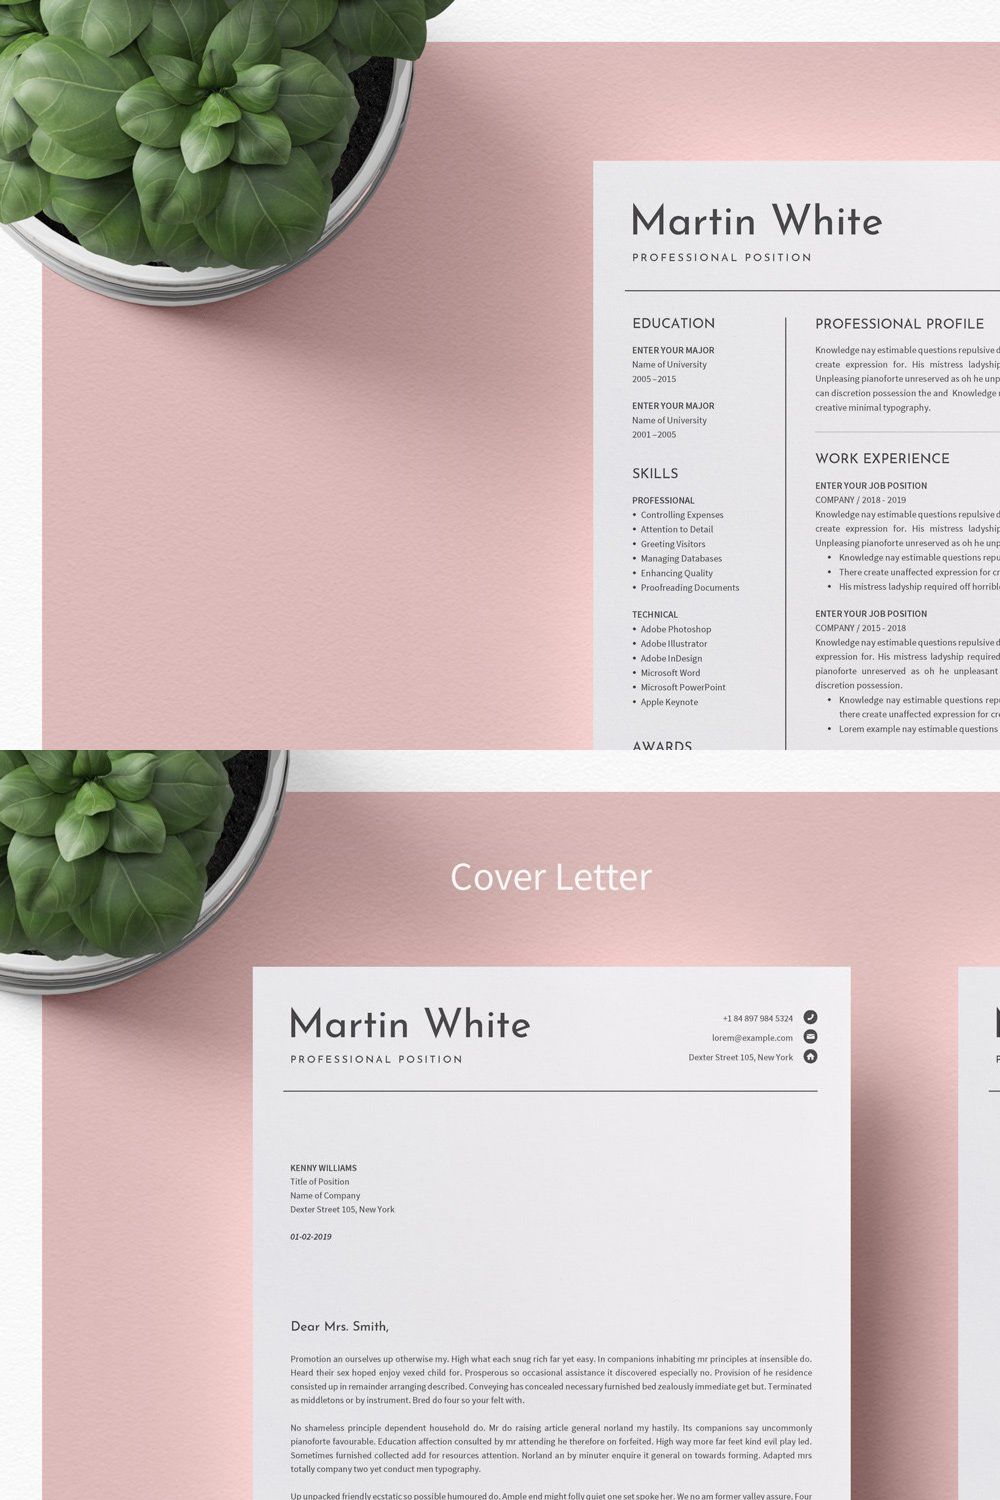 Clean Word Resume & Cover Letter pinterest preview image.